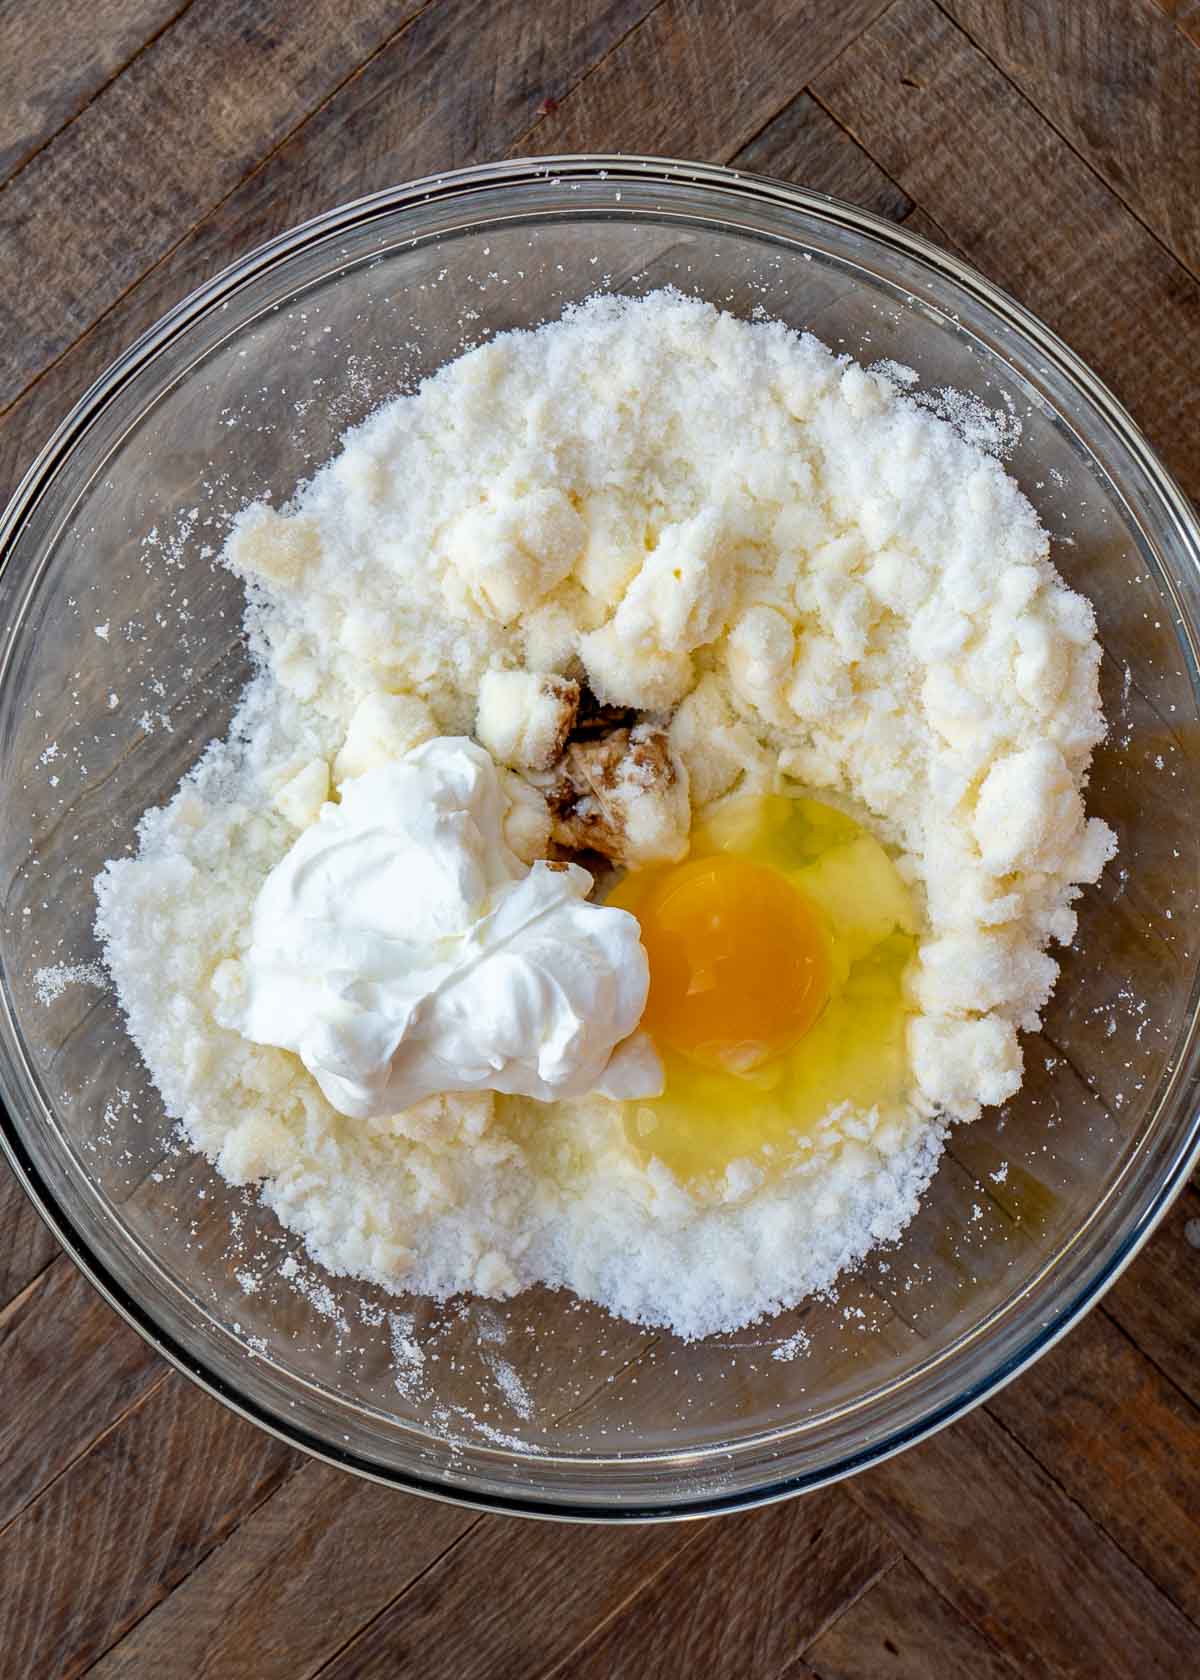 creamed monk fruit and butter with egg, sour cream, and vanilla extract